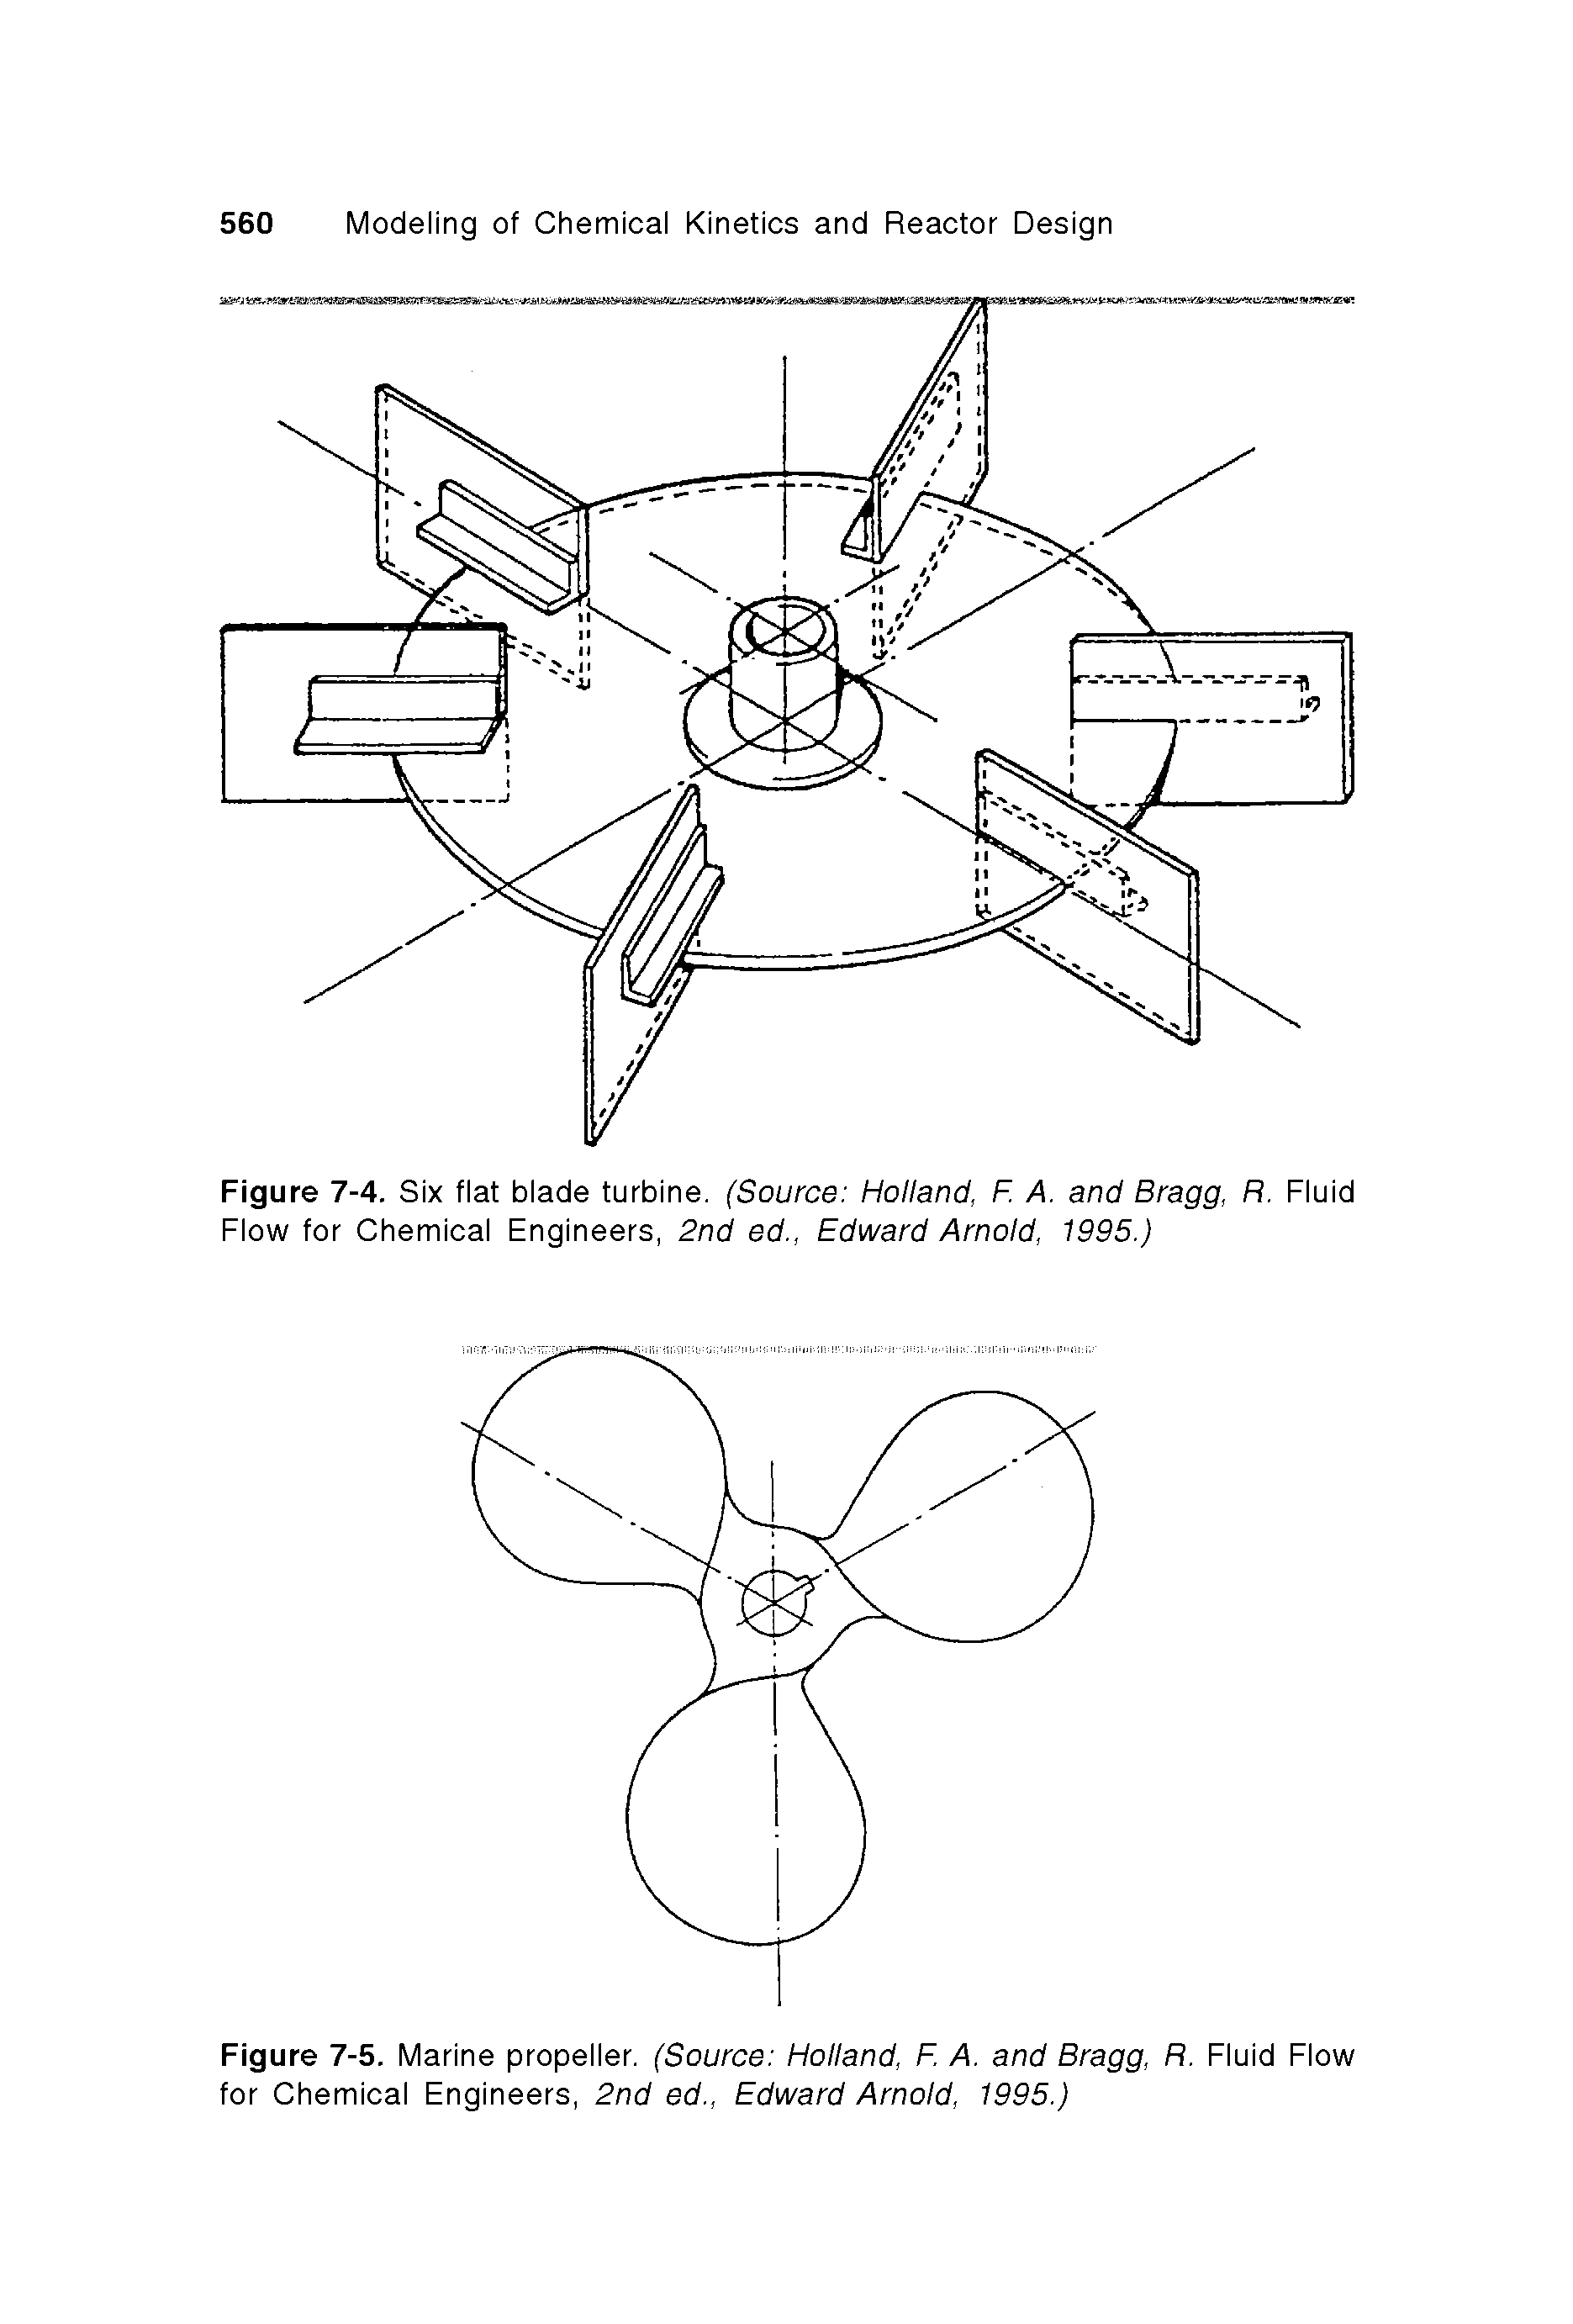 Figure 7-5. Marine propeller. (Source Holland, F. A. and Bragg, R. Fluid Flow for Chemioal Engineers, 2nd ed., Edward Arnold, 1995.)...